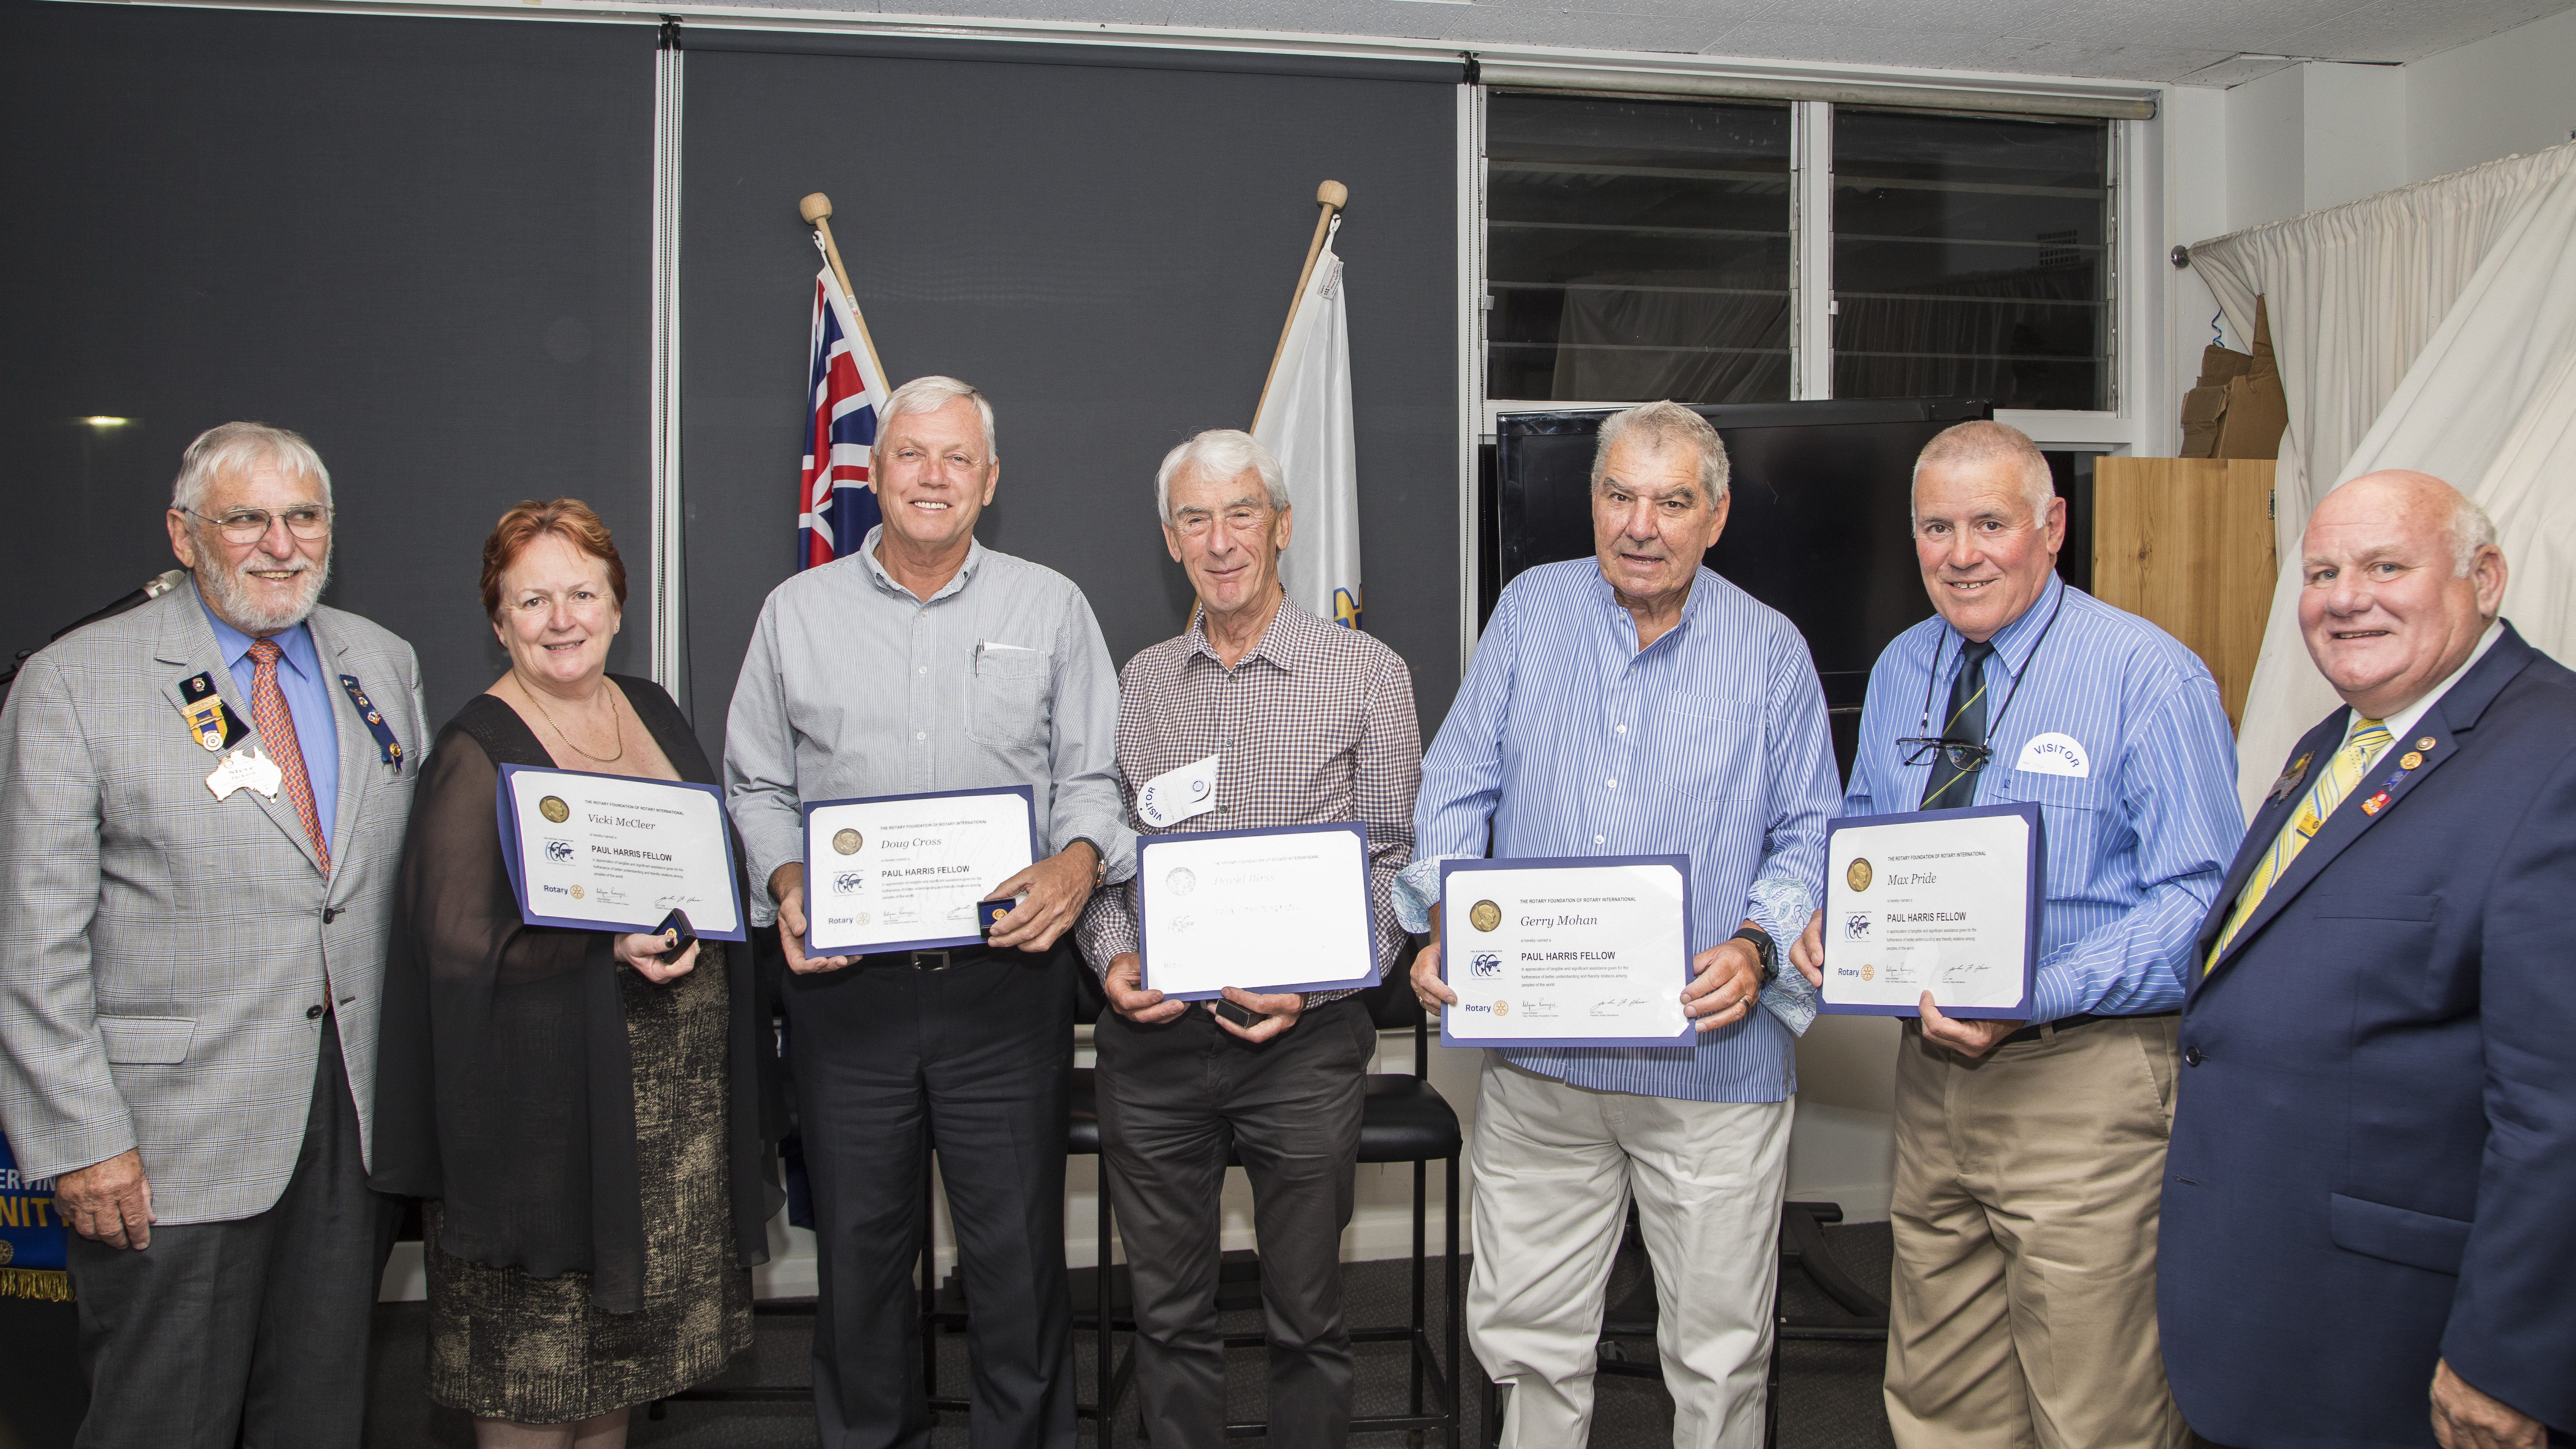 The five members of the Community honoured with the Paul Harris Fellow.
Steve Jackson (District Governor), Vickie McCleer, Doug Cross, David Birss, Gerry Mohan, Max Pride, Peter Raynor (District Chair).   Photo by Henk Tobbe